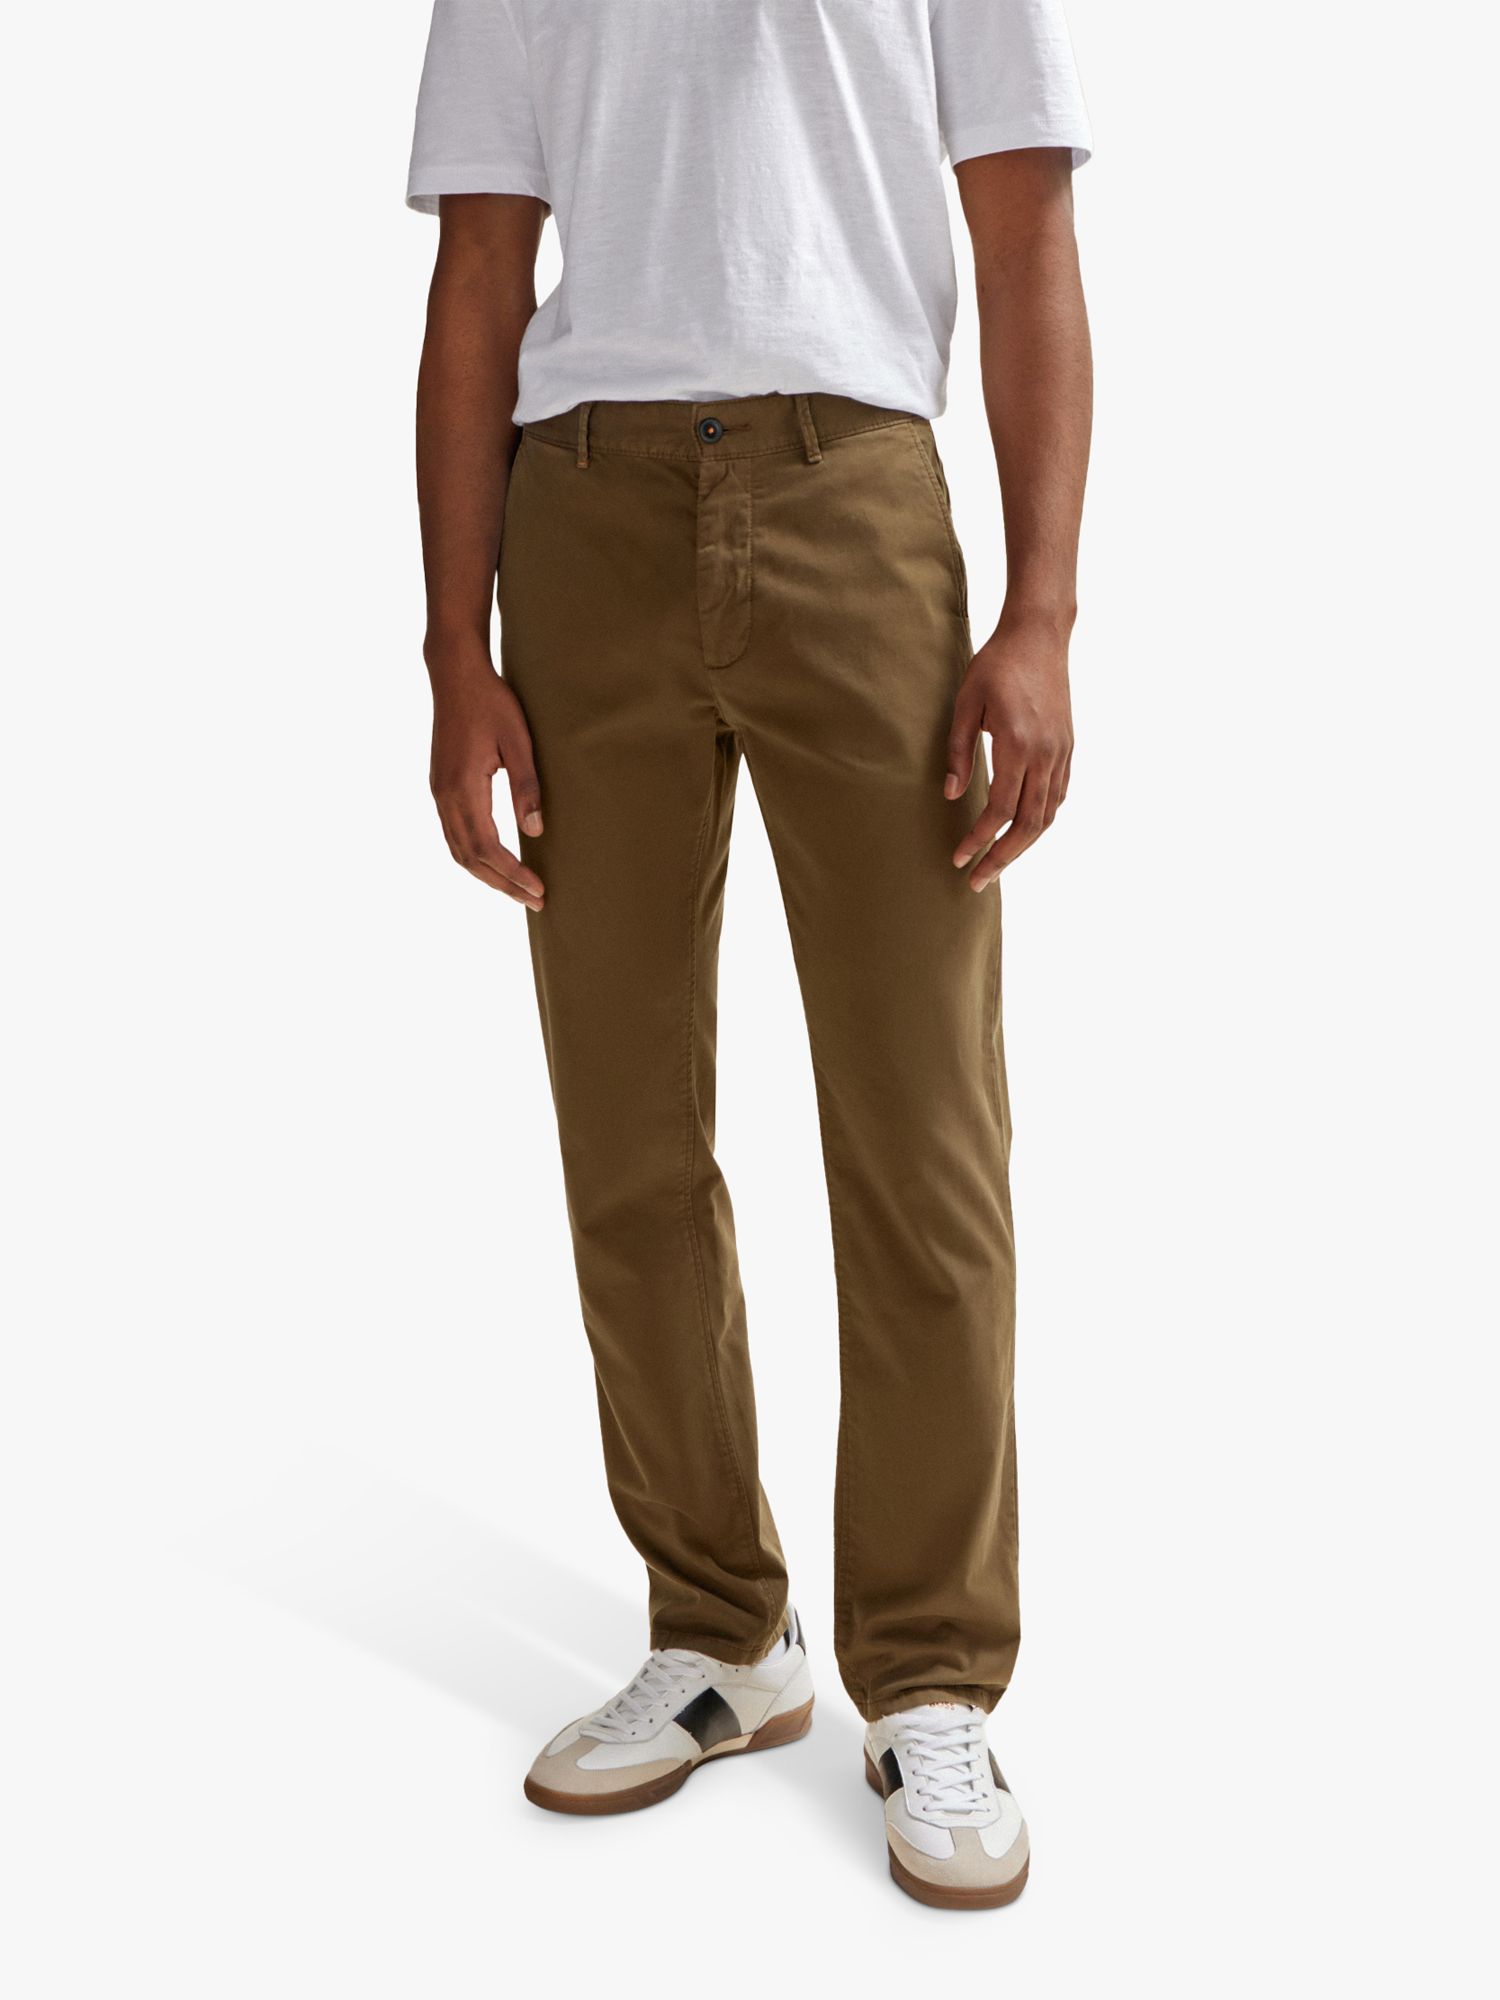 BOSS Slim Fit Chino Trousers, Green, 40R